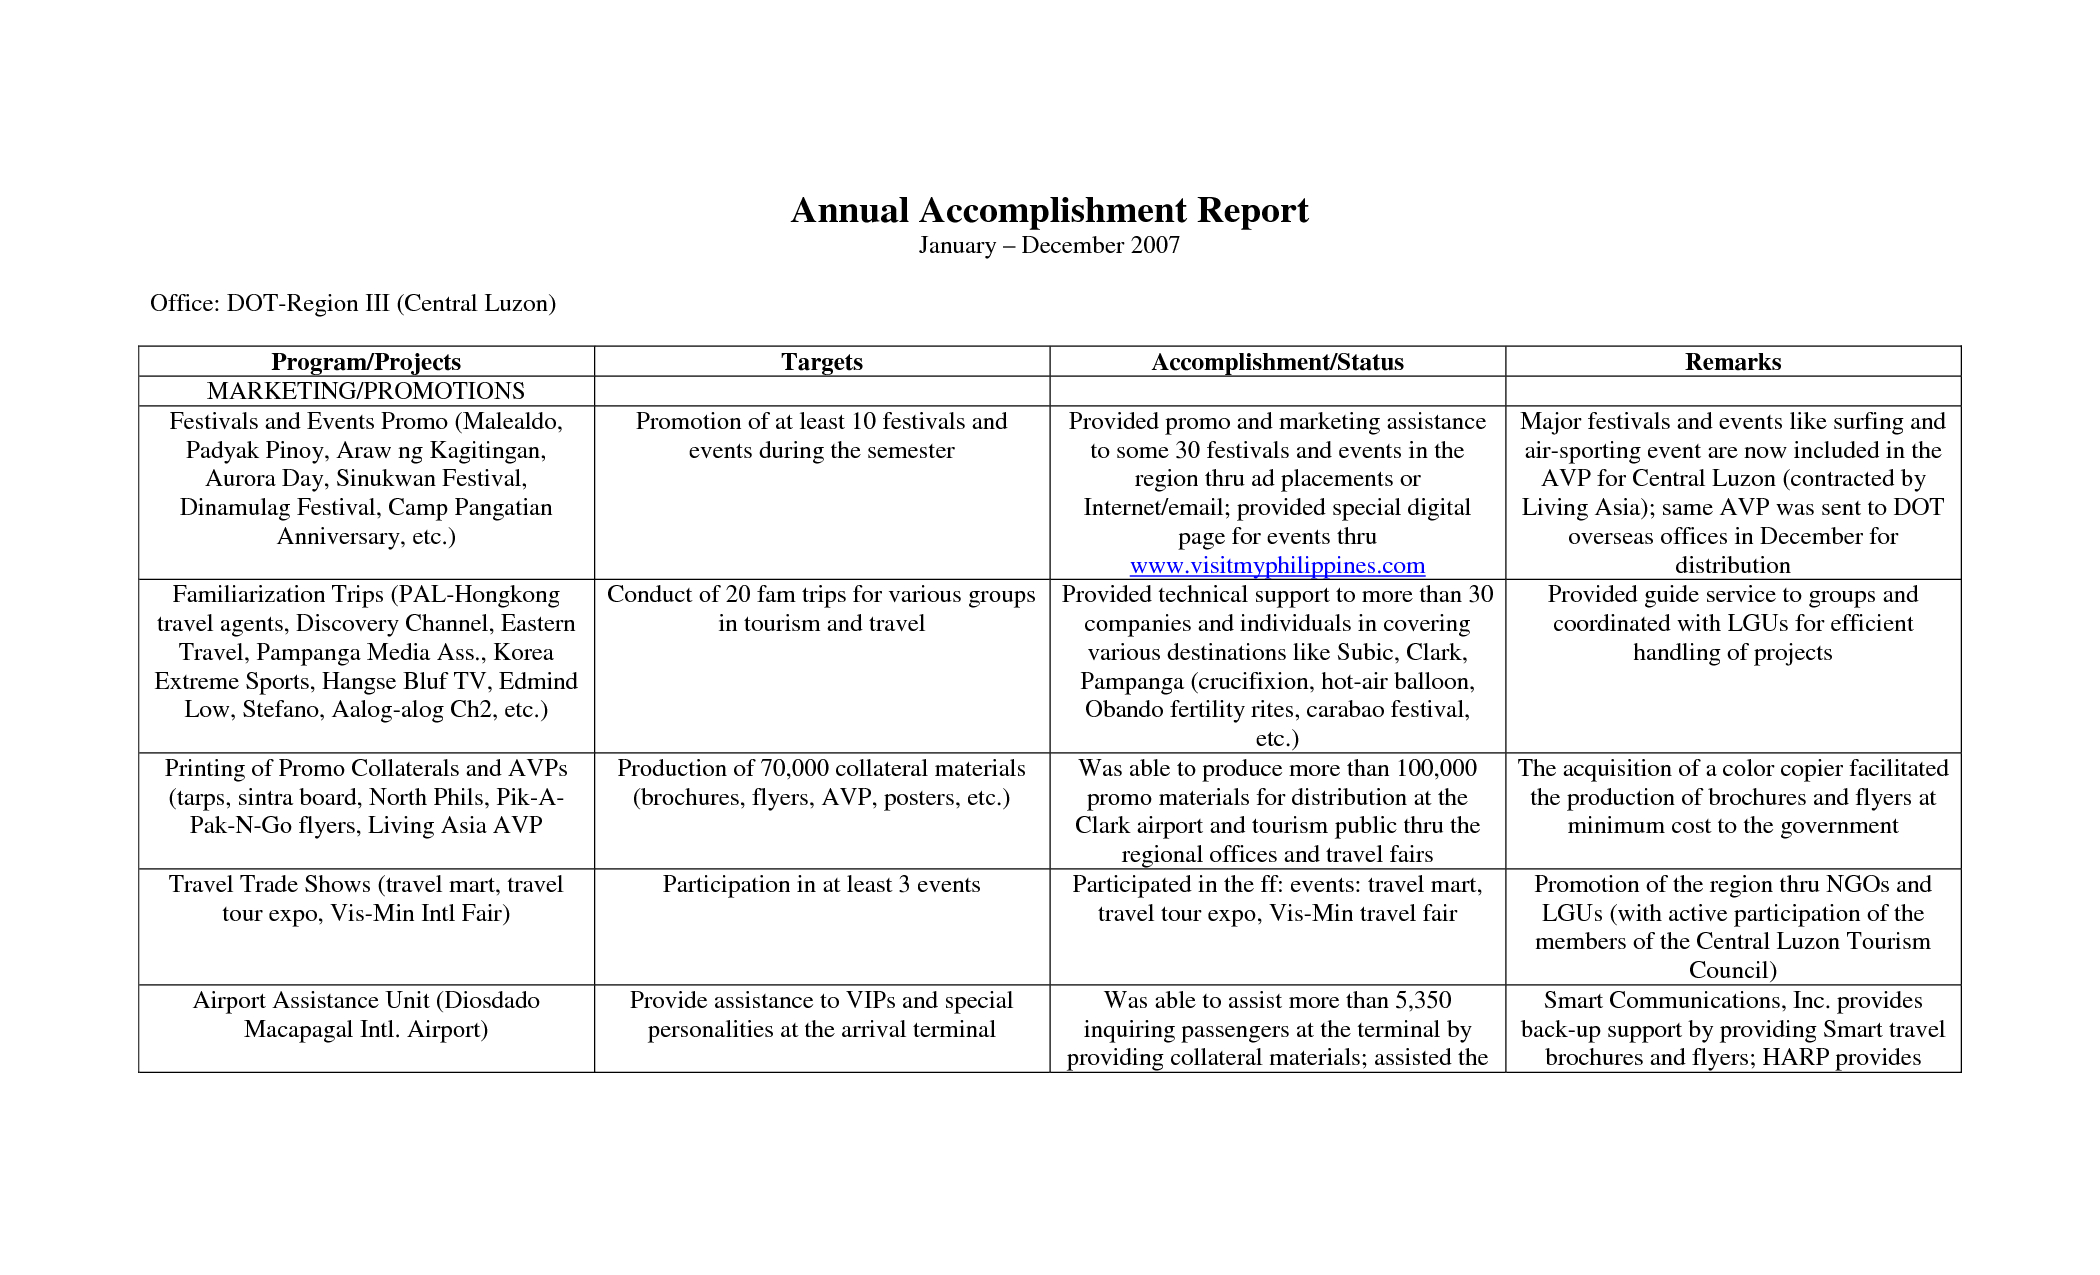 Annual Accomplishment Report Sample With Table Format : Venocor For Weekly Accomplishment Report Template